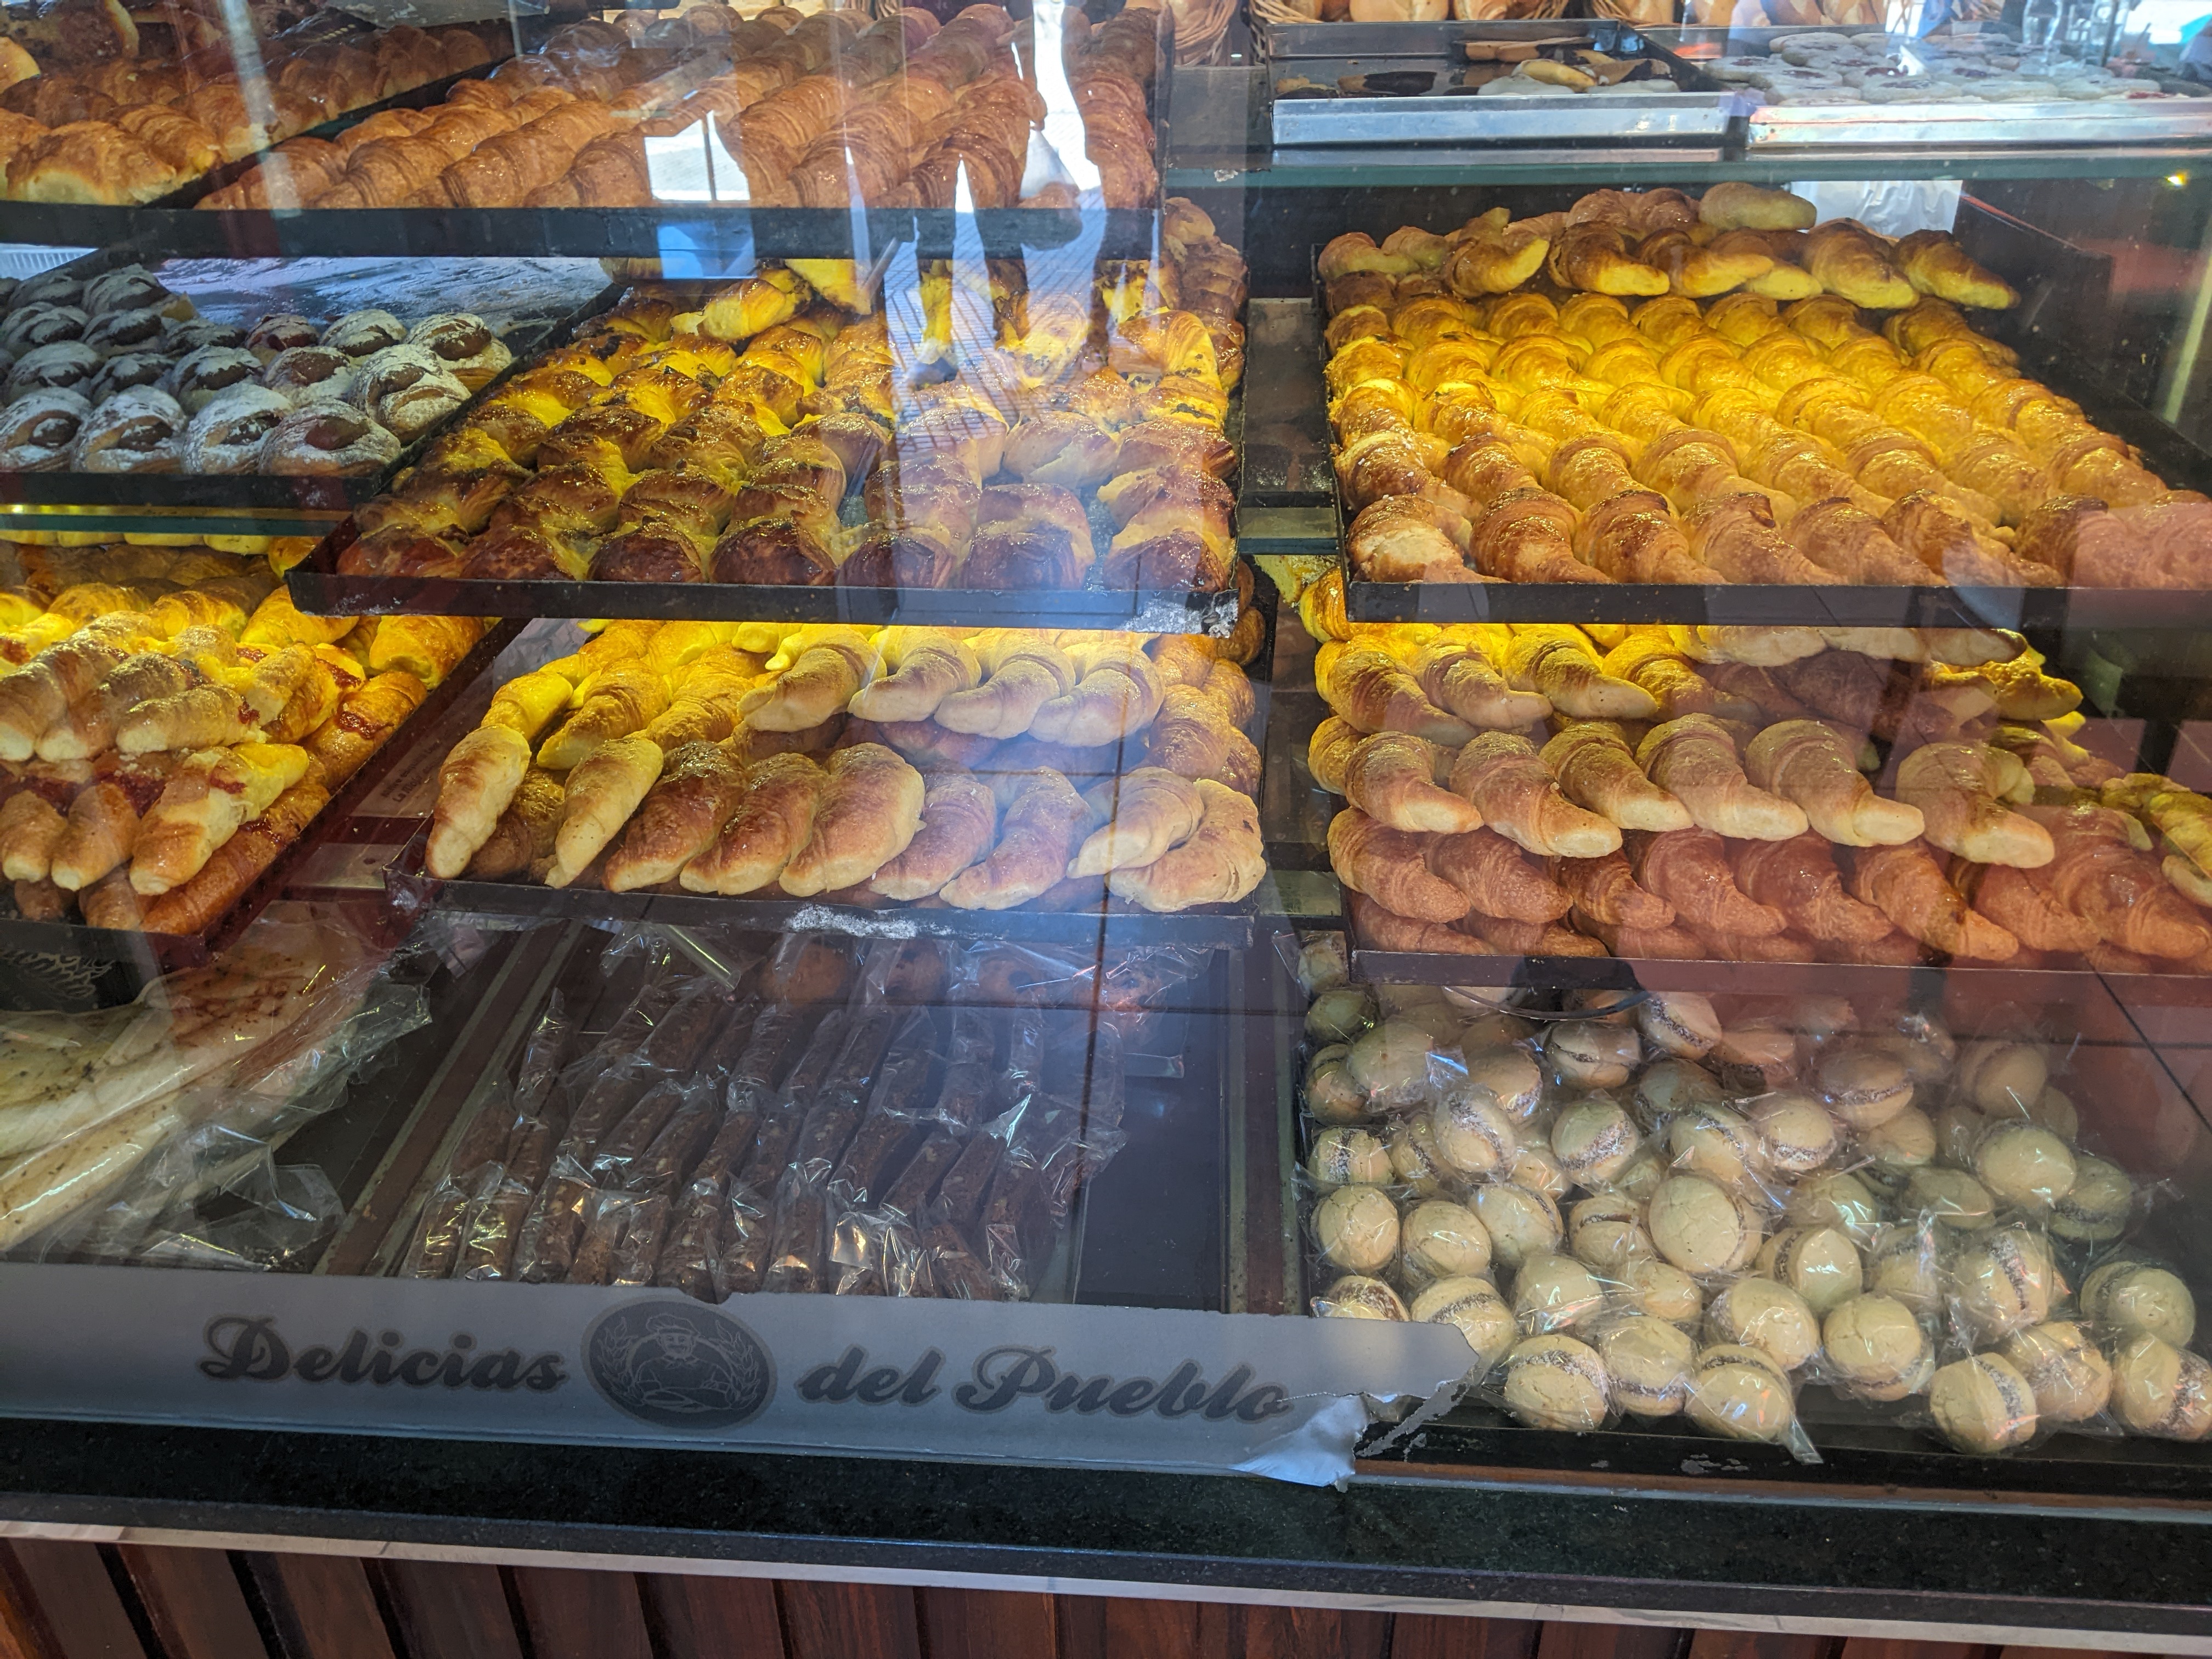 A bakery in Chicoana. Some tough choices had to be made there.